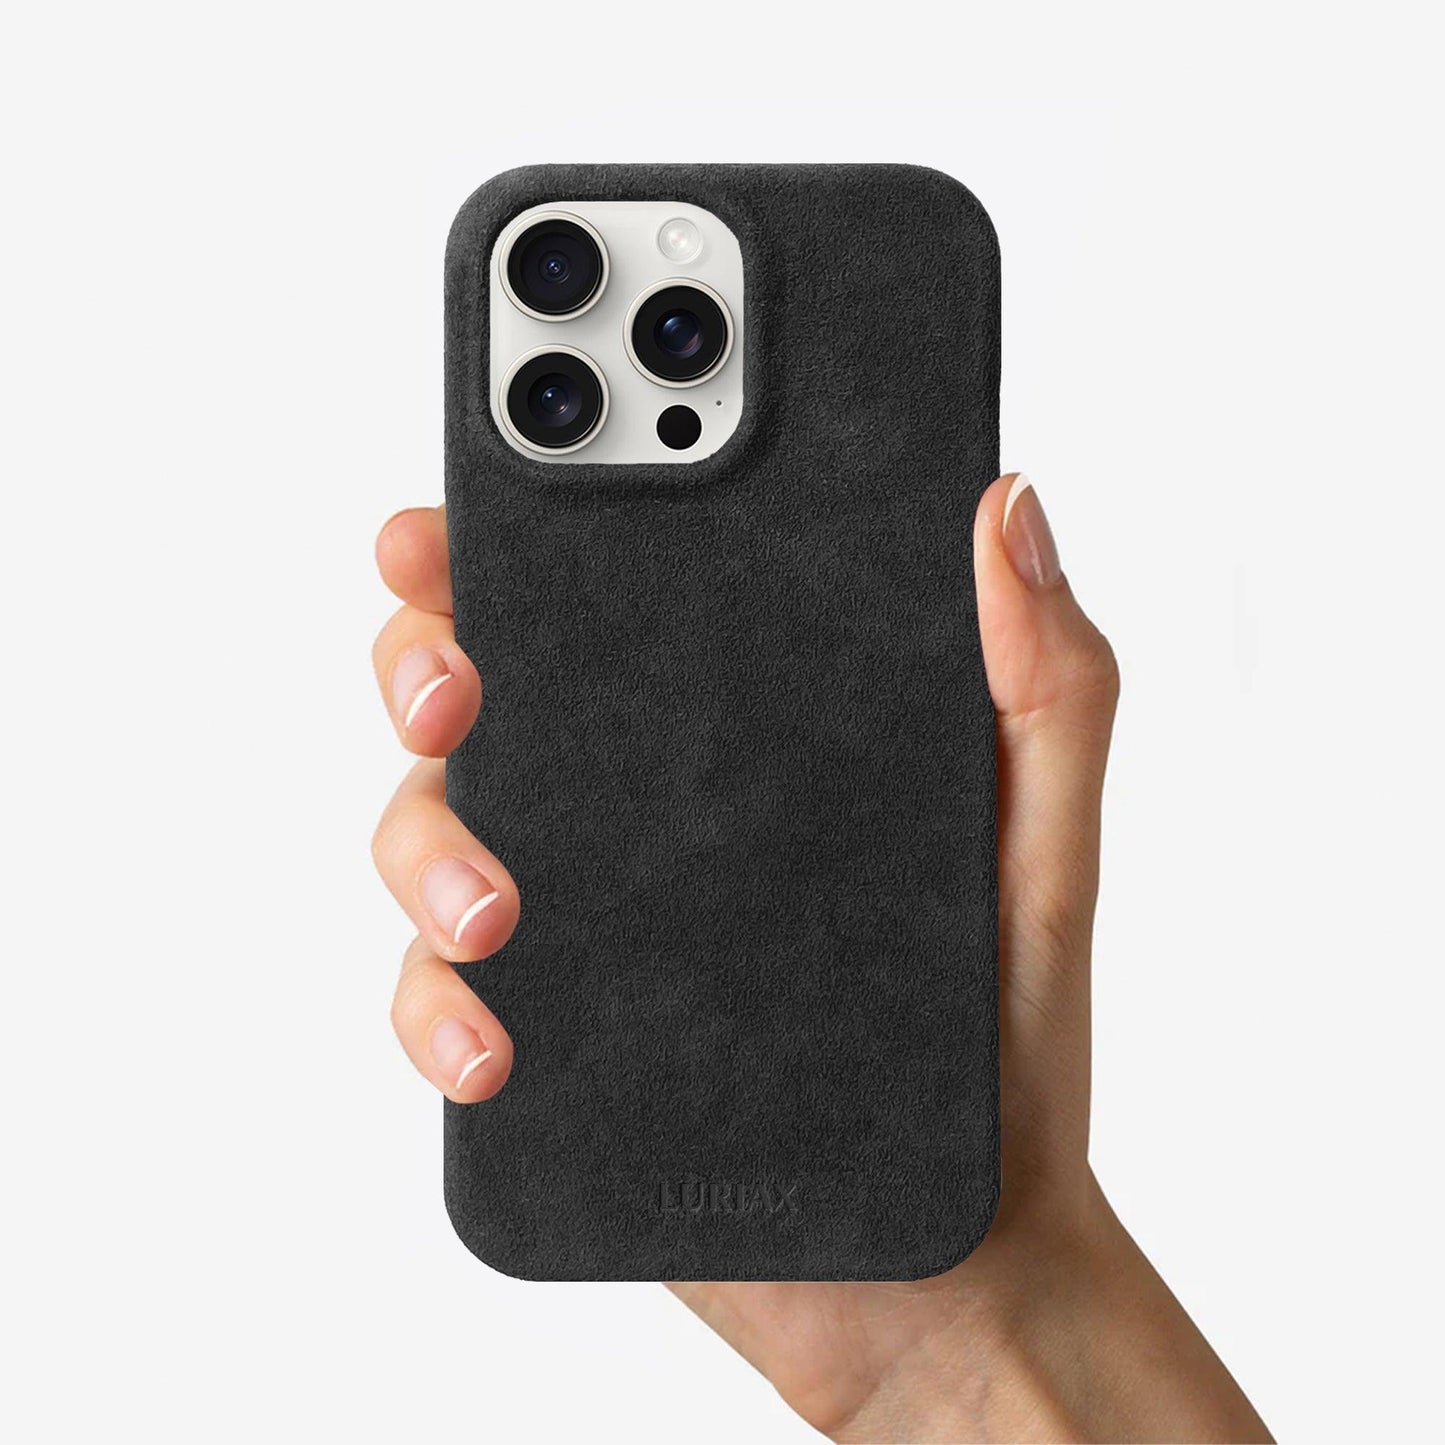 Alcantara Suede Leather iPhone Case and Accessories Collection - The Sport iPhone Case - Charcoal Black - Luriax